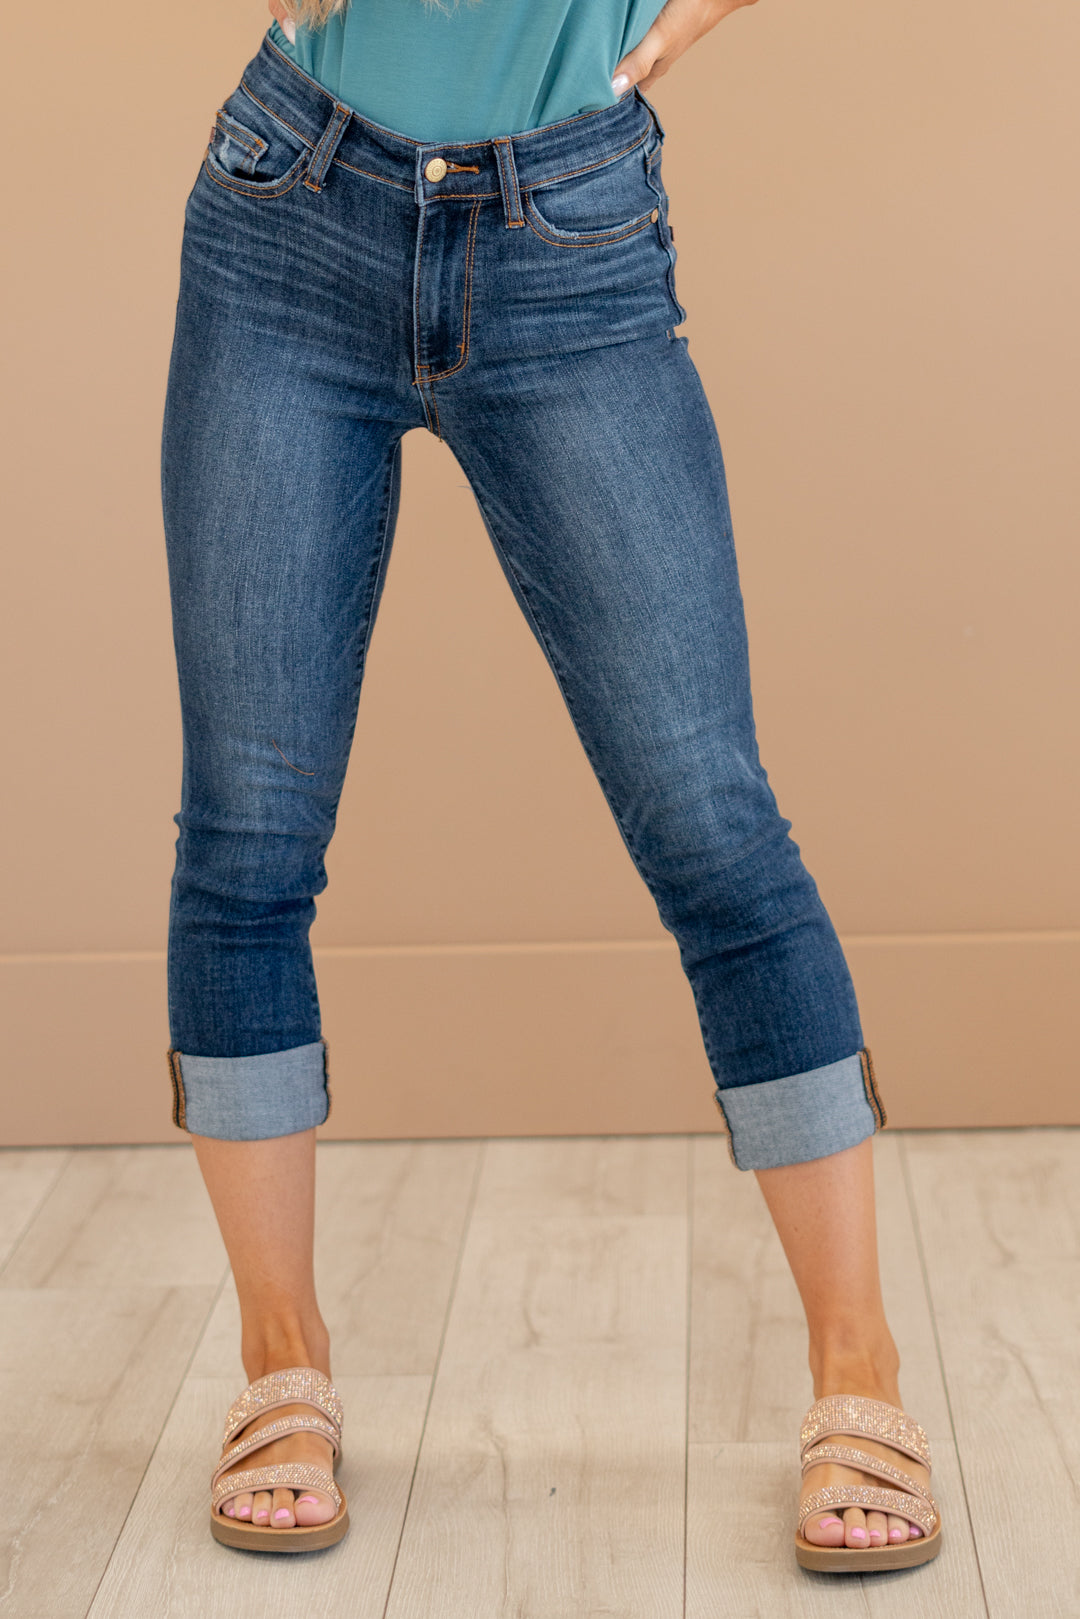 TUMMY CONTROL JUDY BLUES that have you dancing all day long! #judyblue  #judybluejeans #judybluedenim #judyblues #judybluejeanseveryday #s